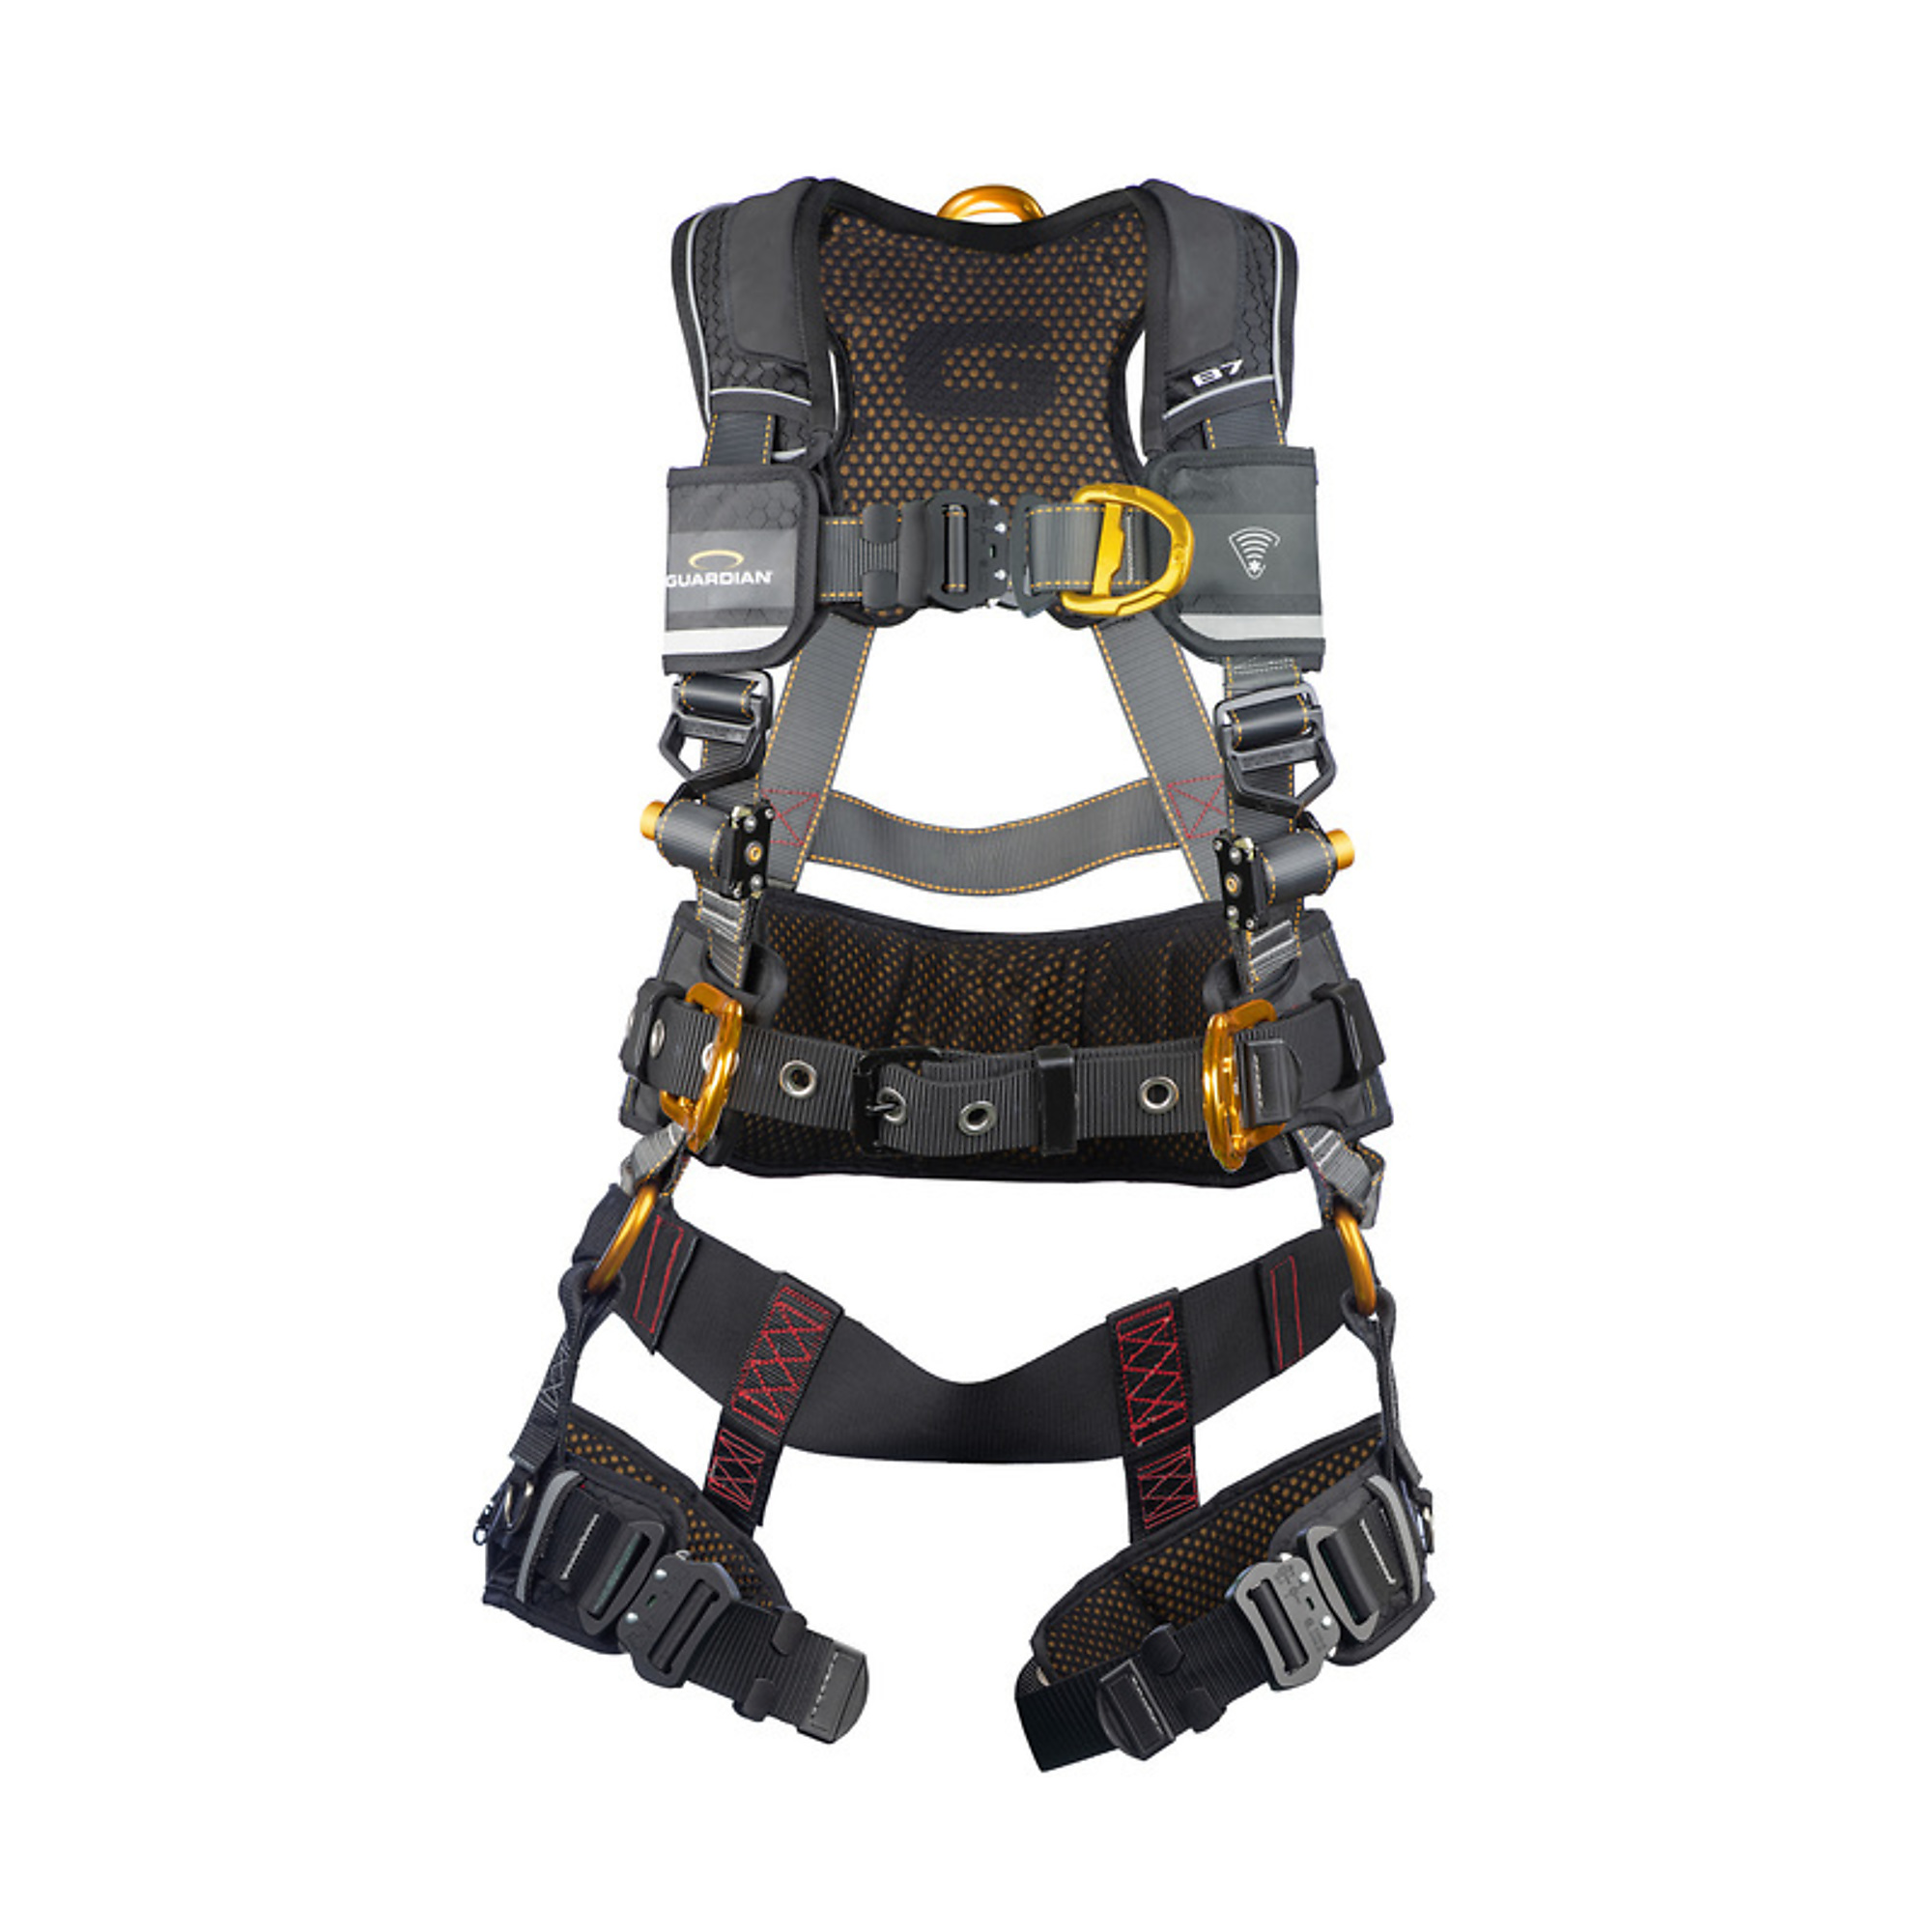 Guardian, B7 Harness w/ Waist Pad, S, 4 D-Ring, QC Buckles, Weight Capacity 420 lb, Harness Size S, Model 3740073